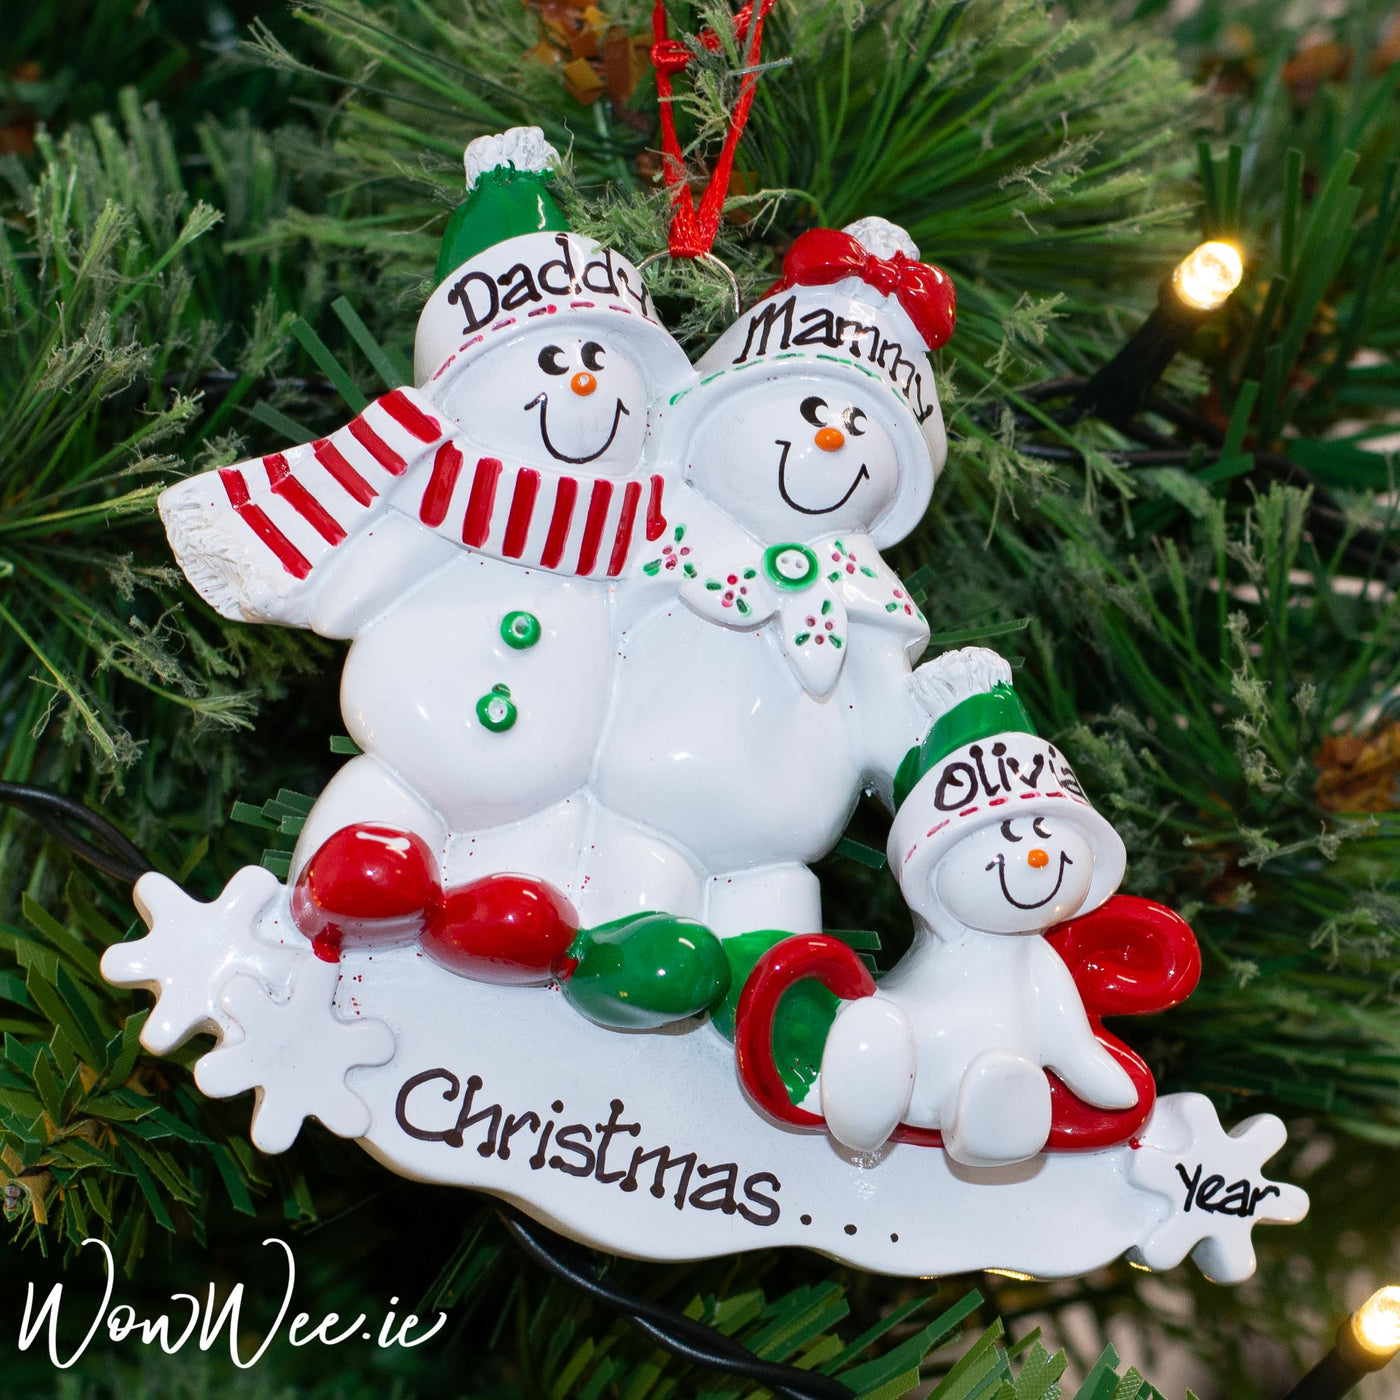 Personalised Christmas Tree Decorations - Snowman Sled 3 - WowWee.ie Personalised Gifts